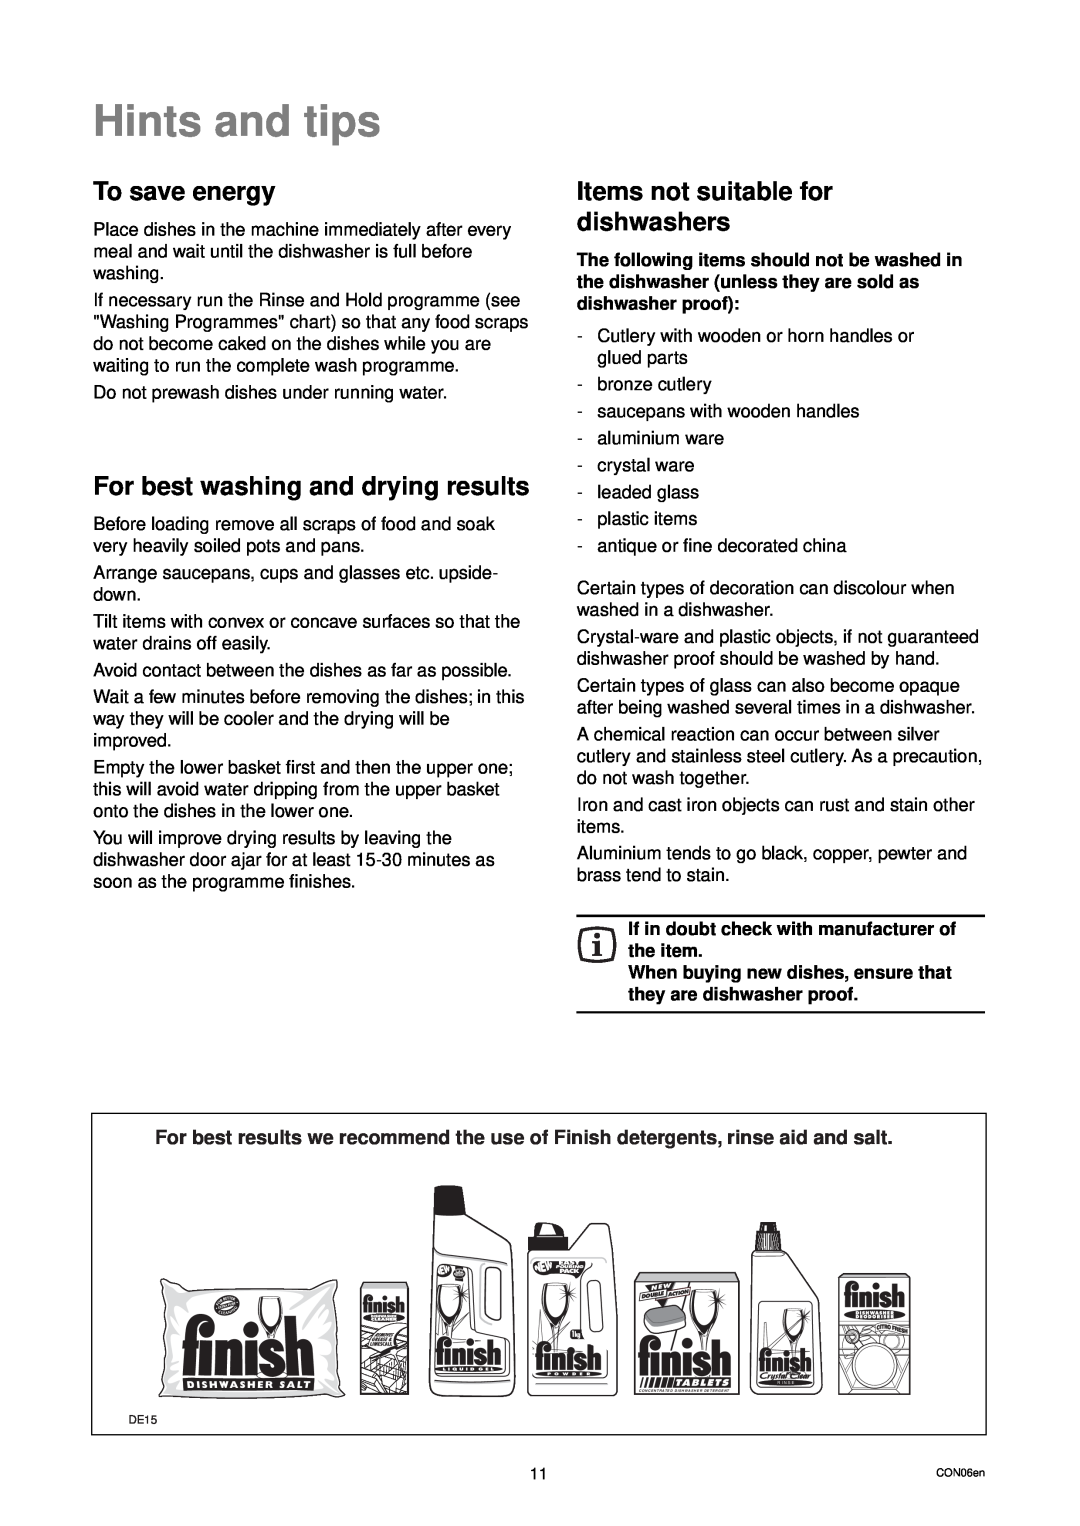 Zanussi DWS 919 Hints and tips, To save energy, For best washing and drying results, Items not suitable for dishwashers 